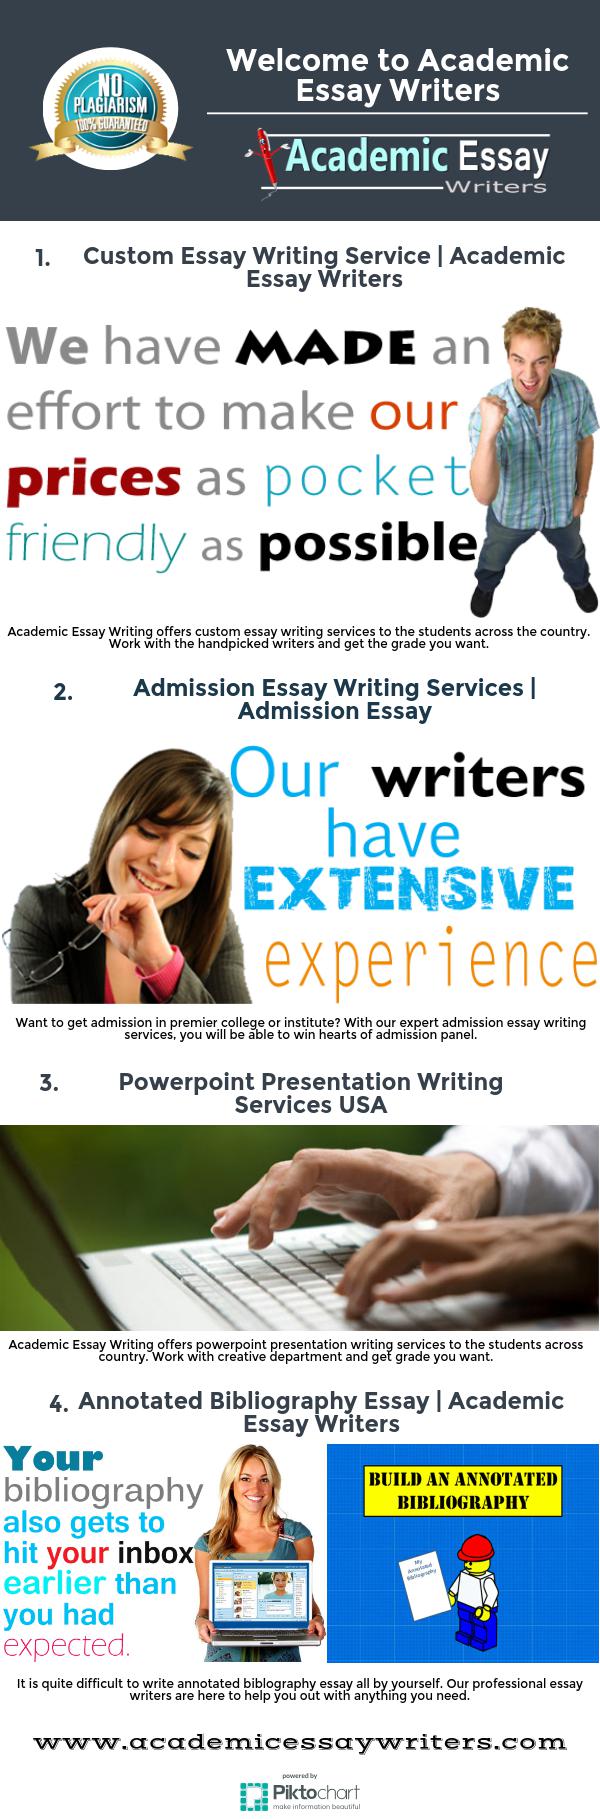 business essay writing service